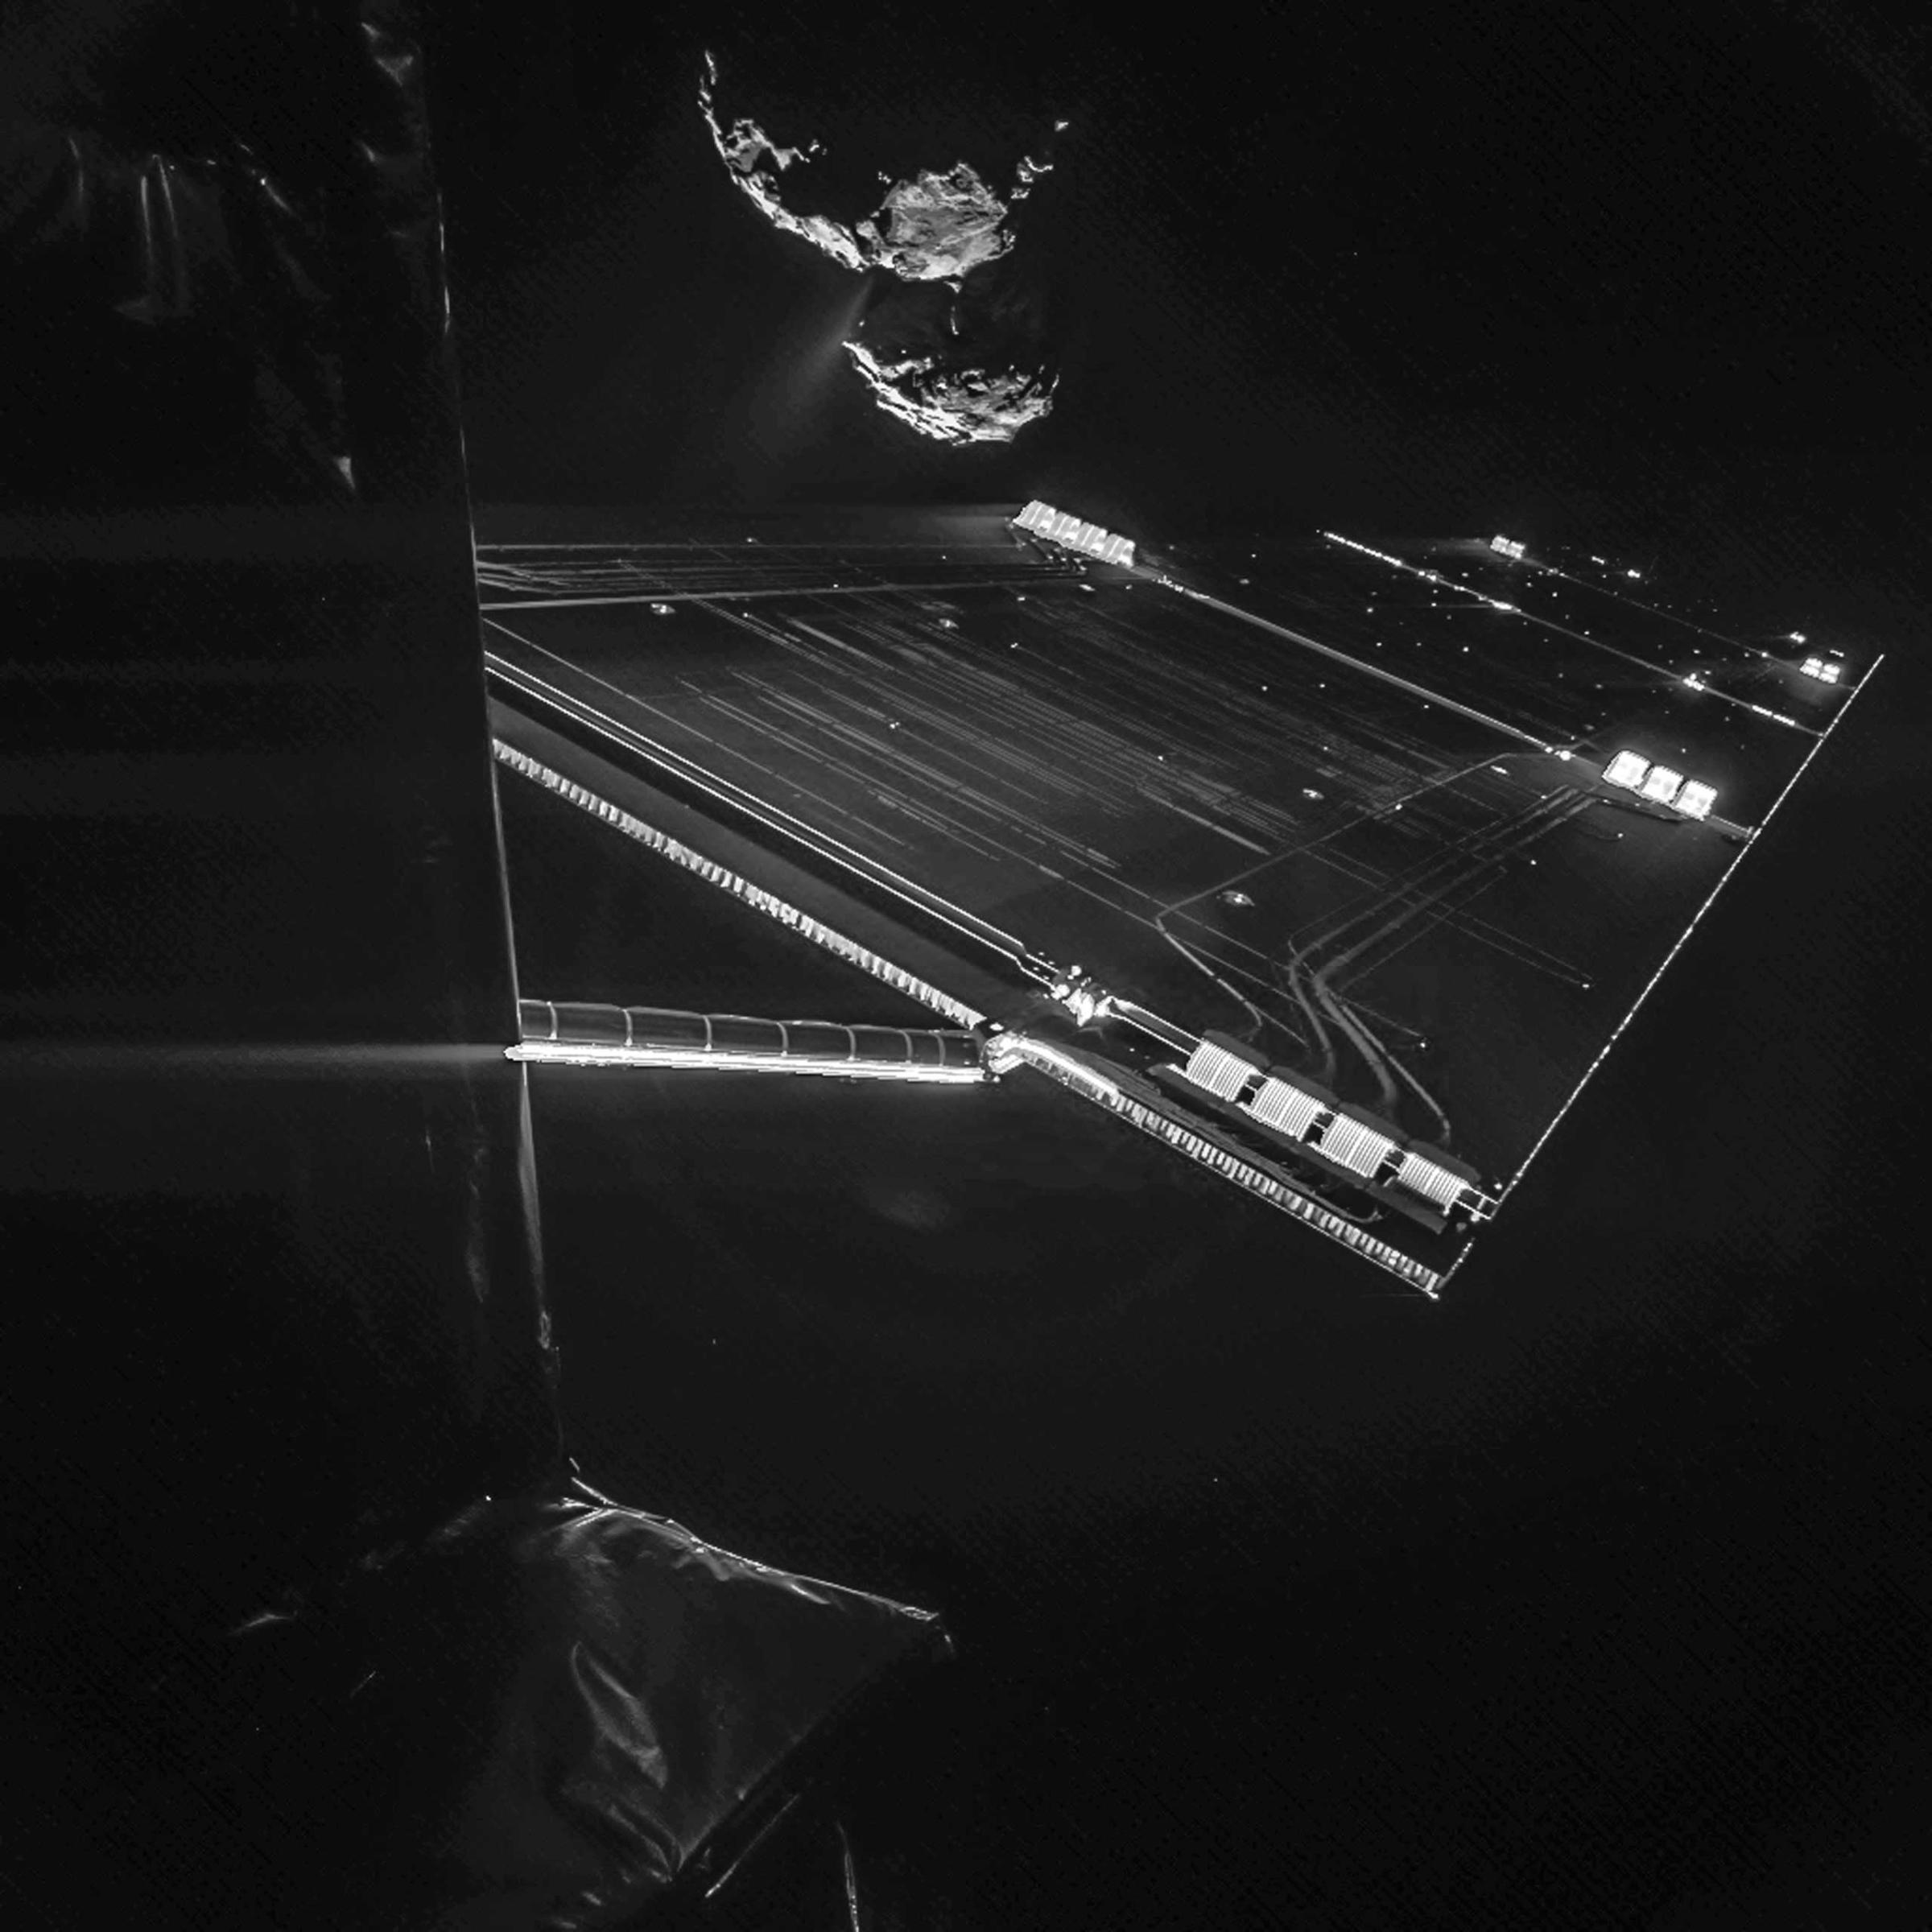 This selfie composed of two different images shows the Rosetta spacecraft as it soars past a comet on Oct. 7, 2014.